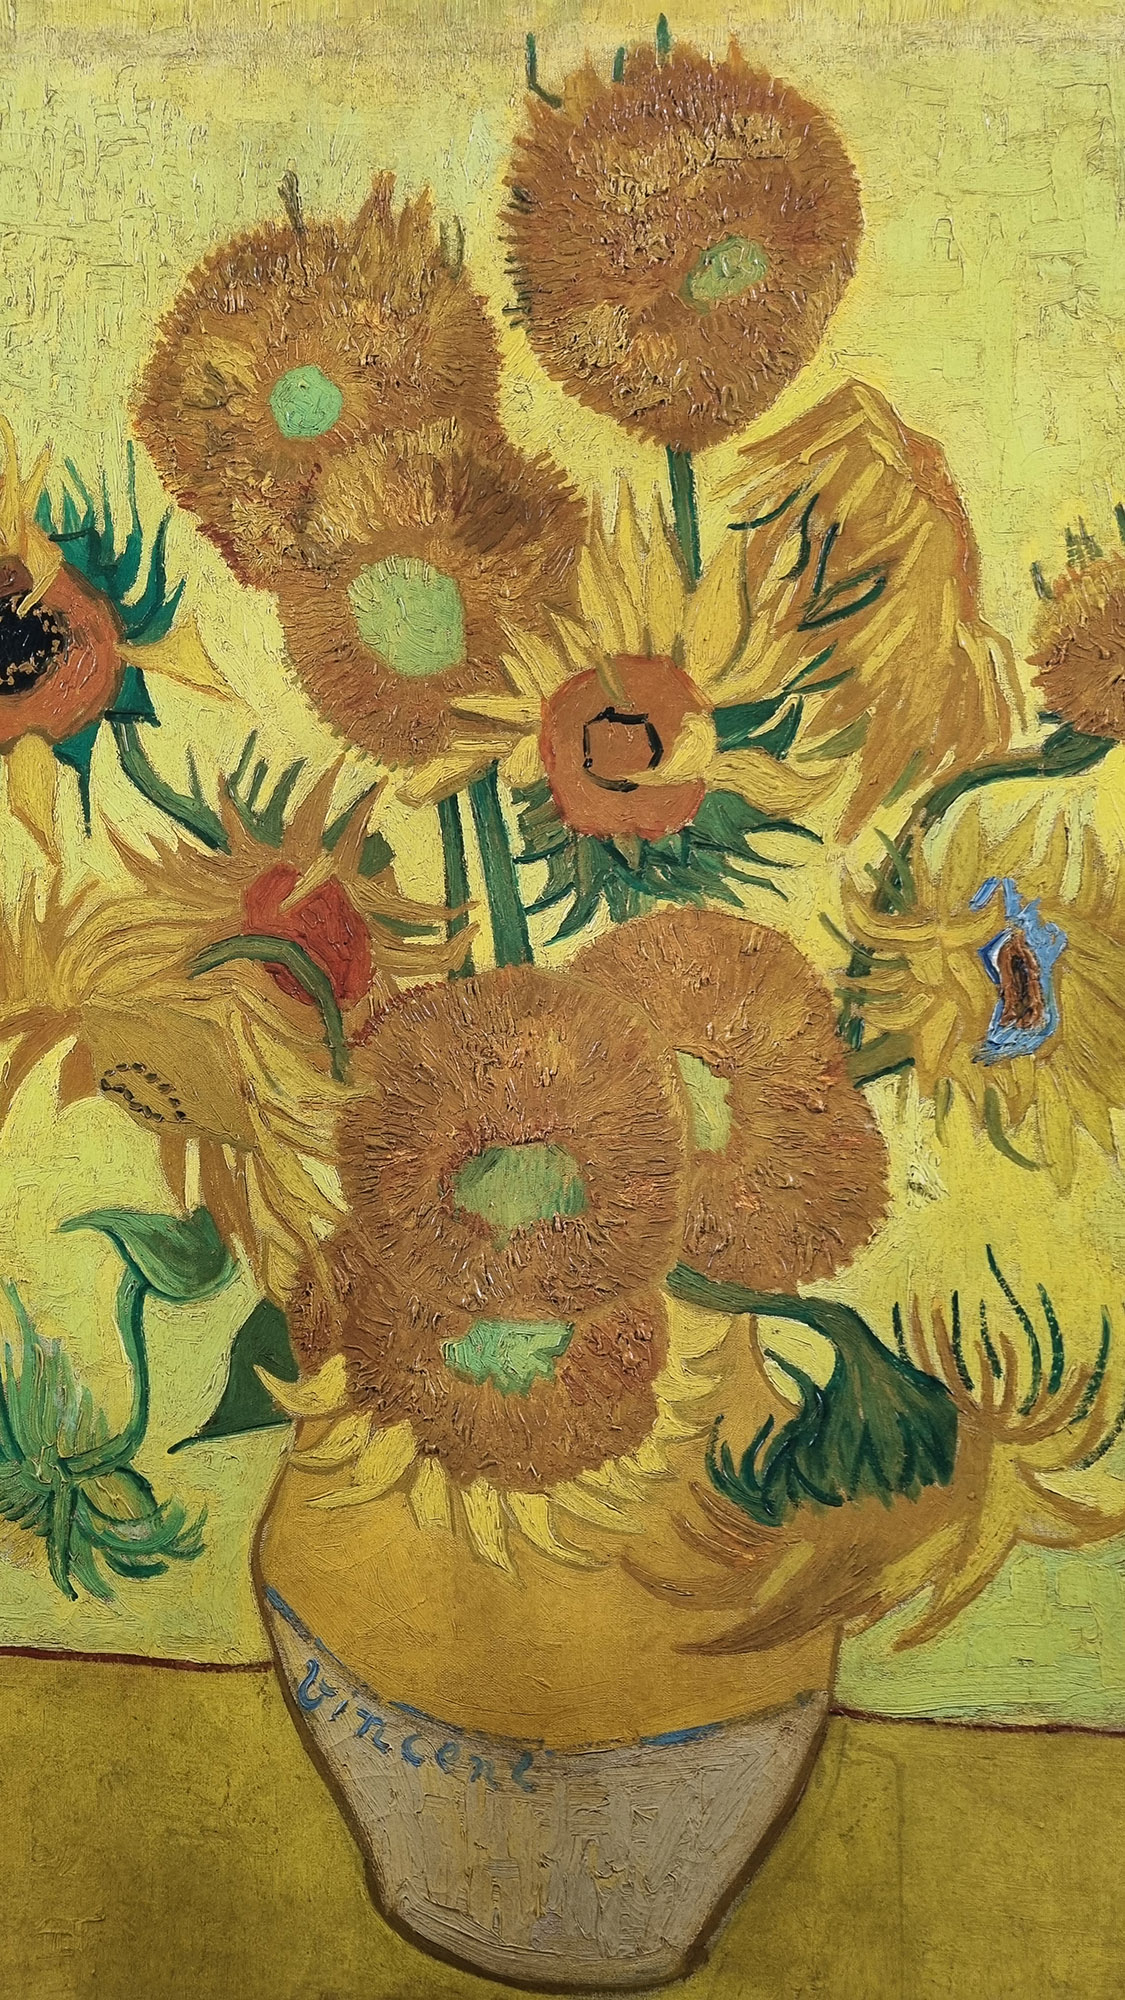 Rare Limited Edition Vincent Van Gogh ""Sunflowers"" One of only 75 Published. - Image 2 of 8